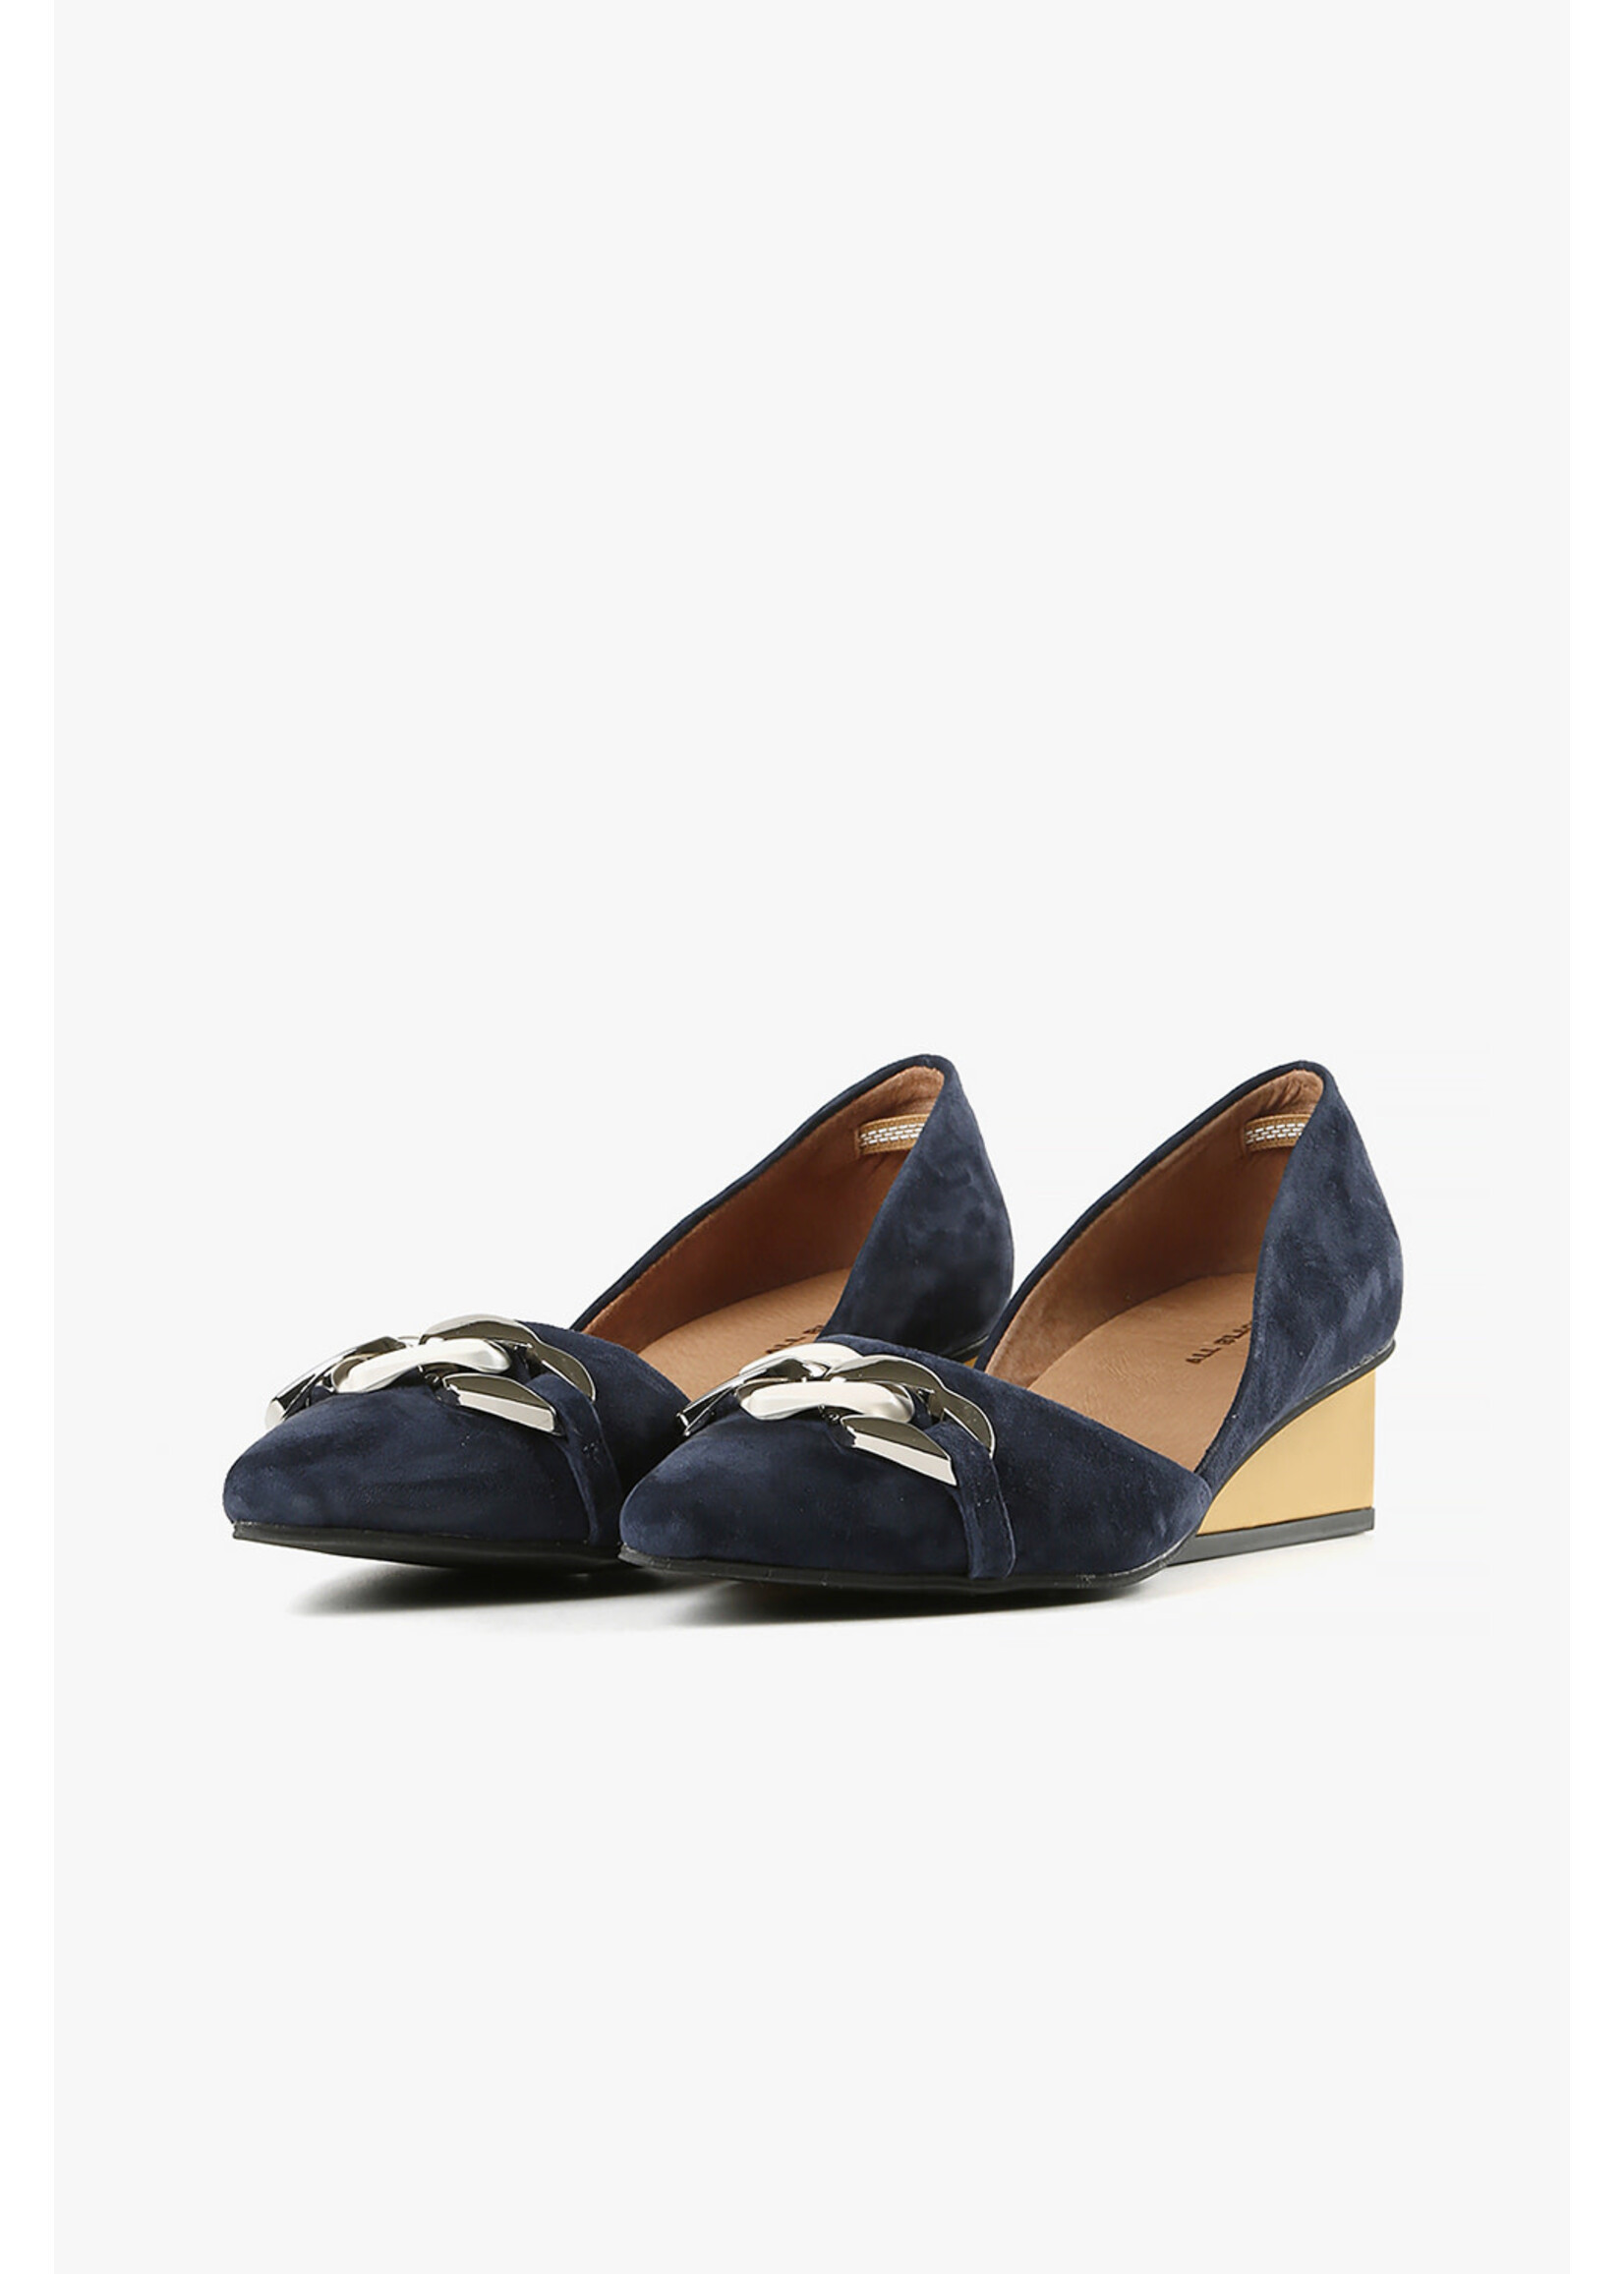 ALL BLACK Heart Link Wedge by All BLACK in Navy Suede Blowout Final Sale